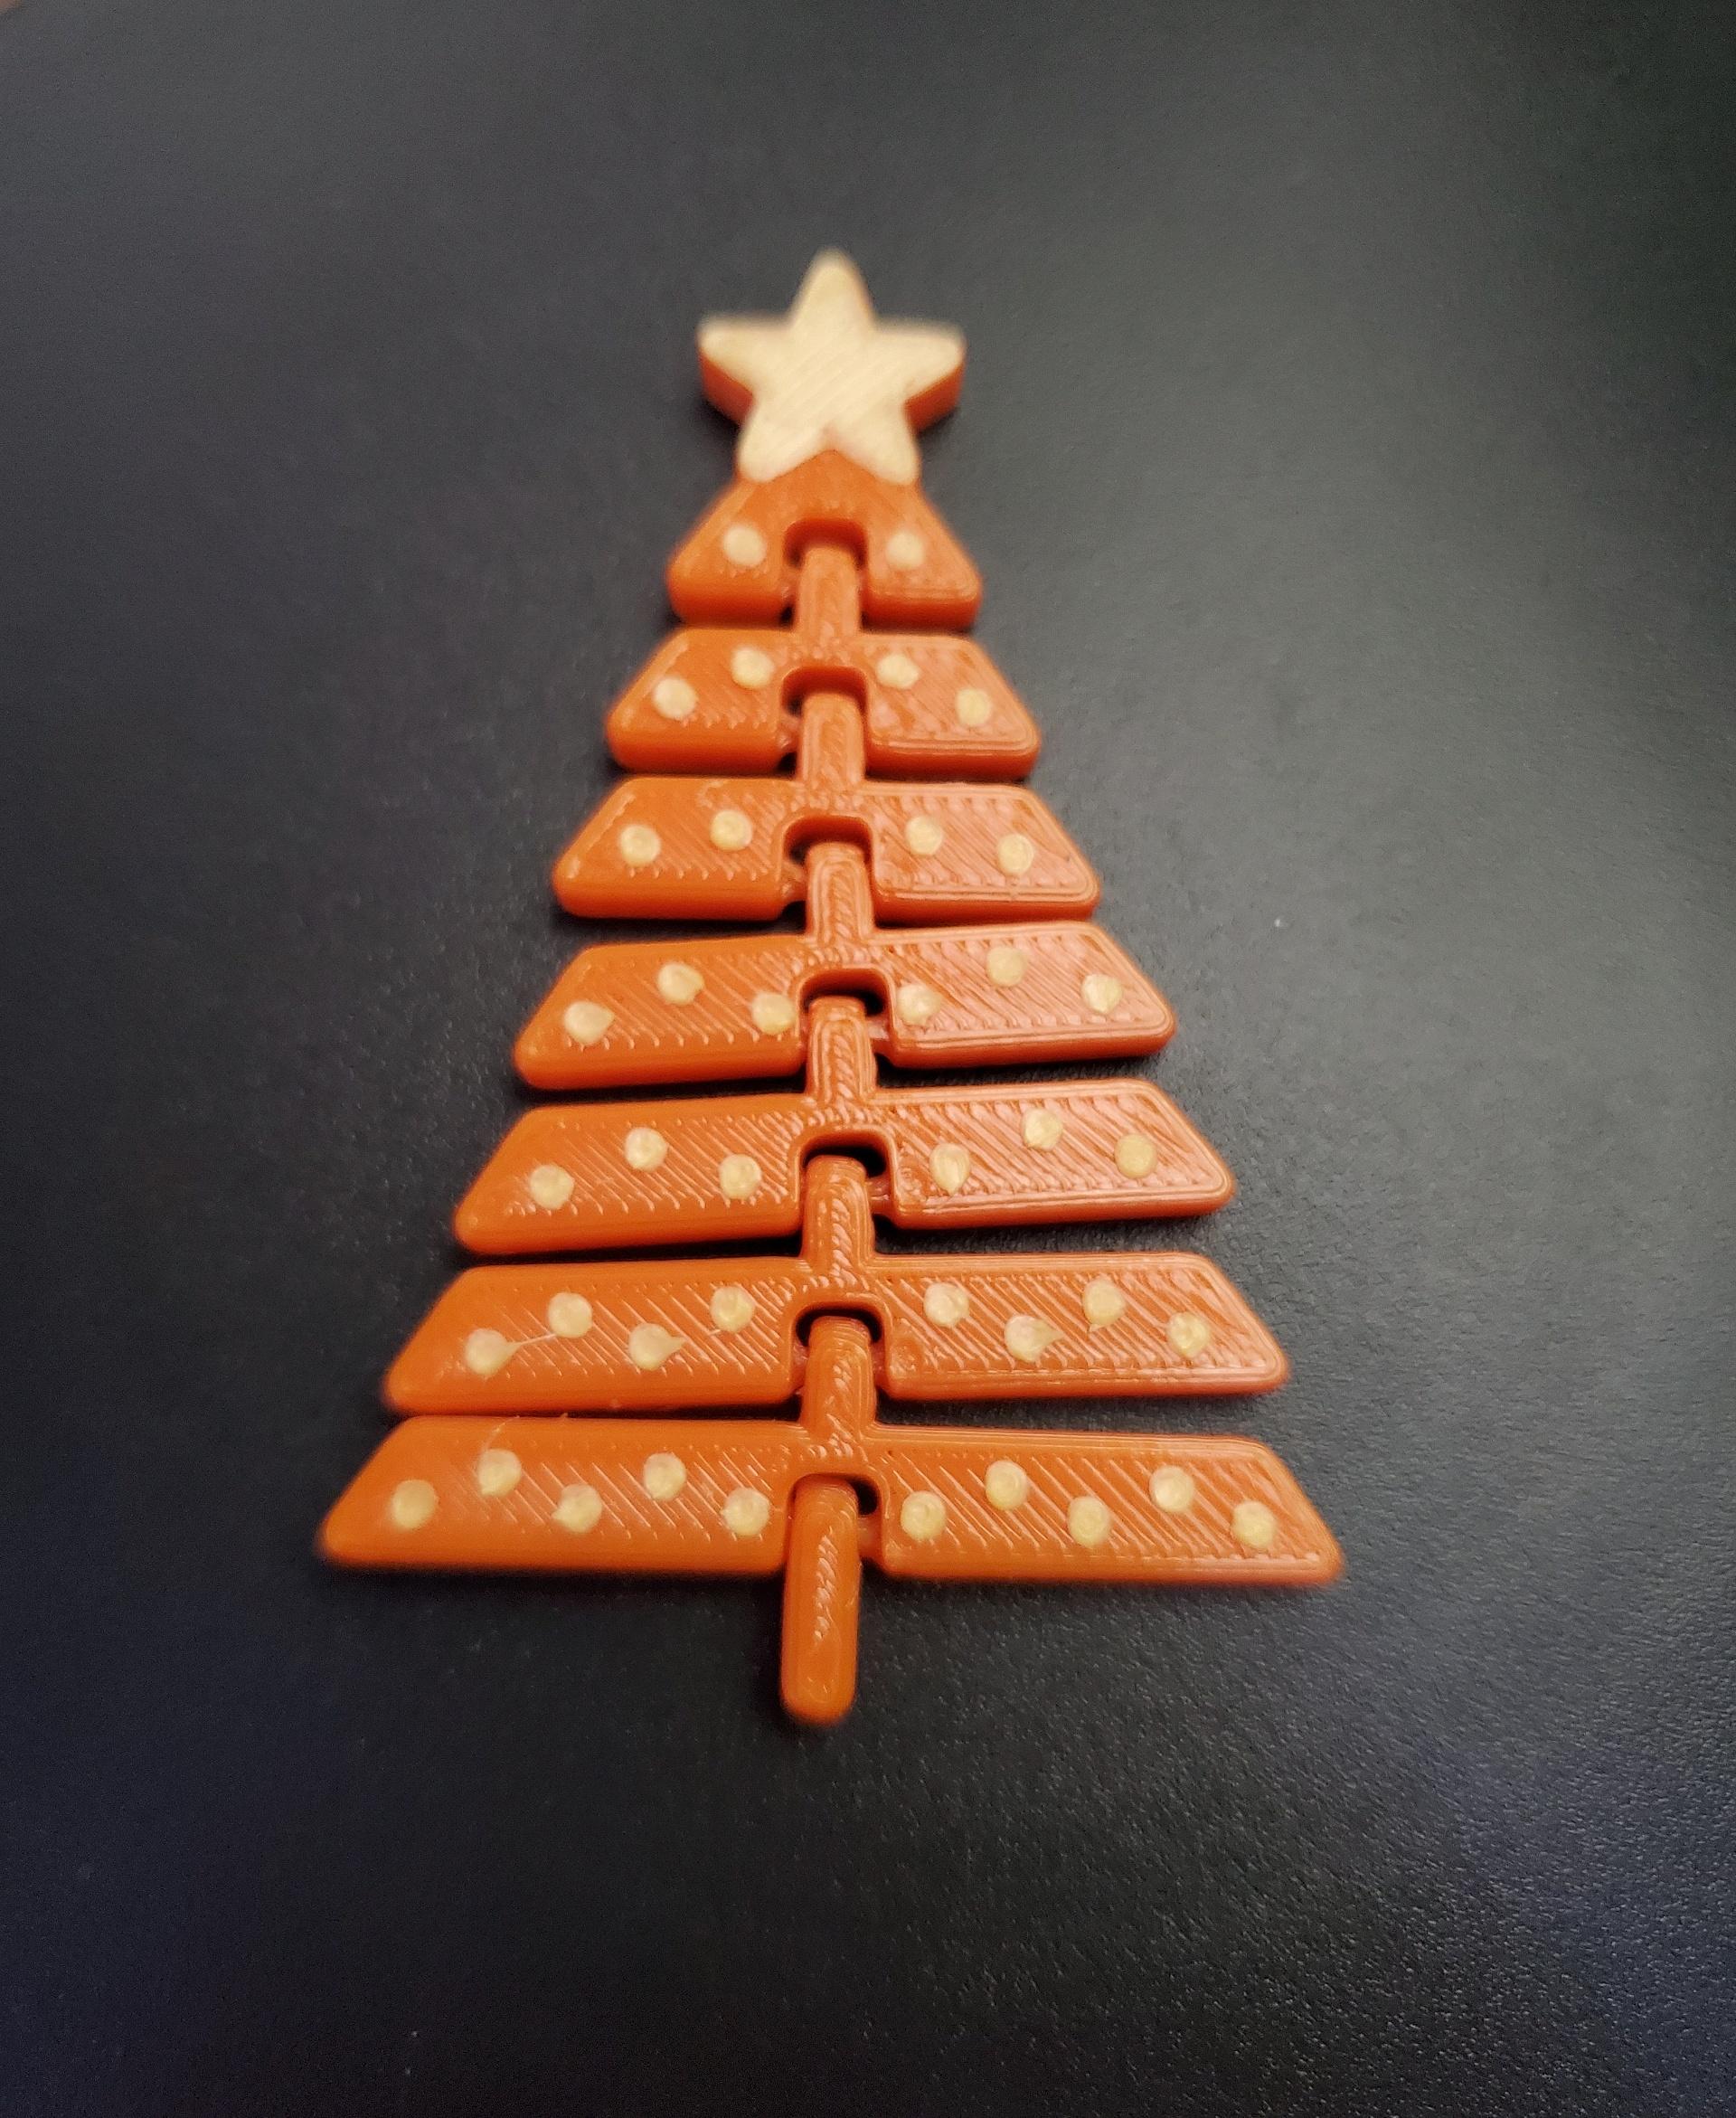 Articulated Christmas Tree with Star and Ornaments - Print in place fidget toys - 3mf - IIIDMAX burnt orange - 3d model